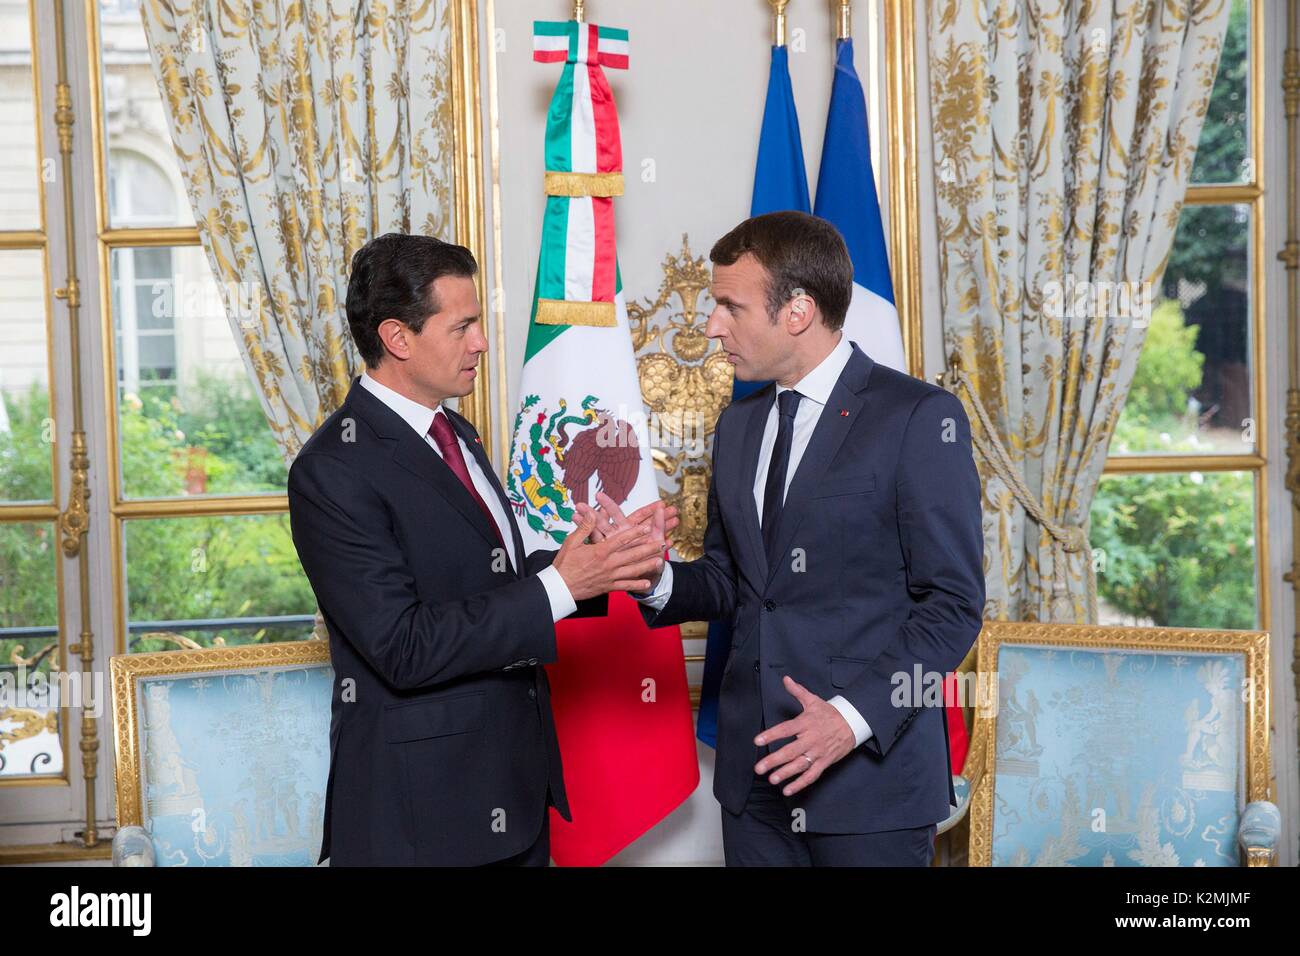 Mexican President Enrique Pena Nieto, left, during a bilateral meeting with French President Emmanuel Macron at the Elysee Palace July 7, 2017 in Paris, France. Stock Photo